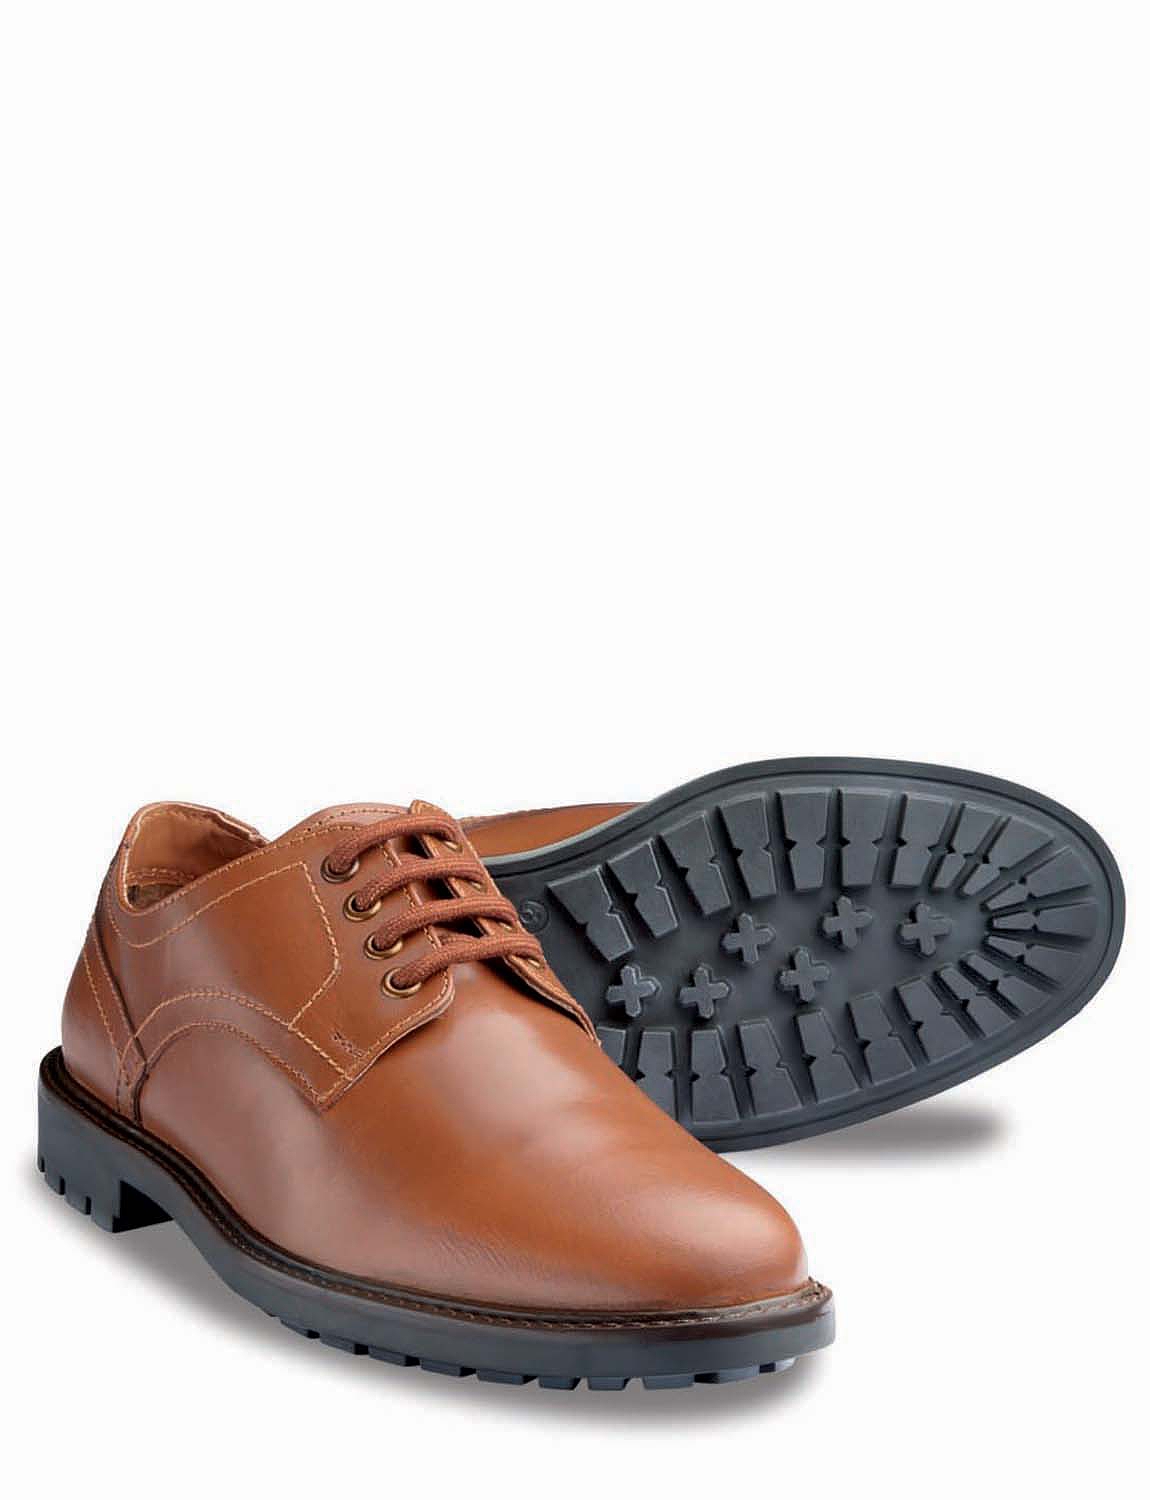 Leather Lace Shoe With Grip Sole | Chums